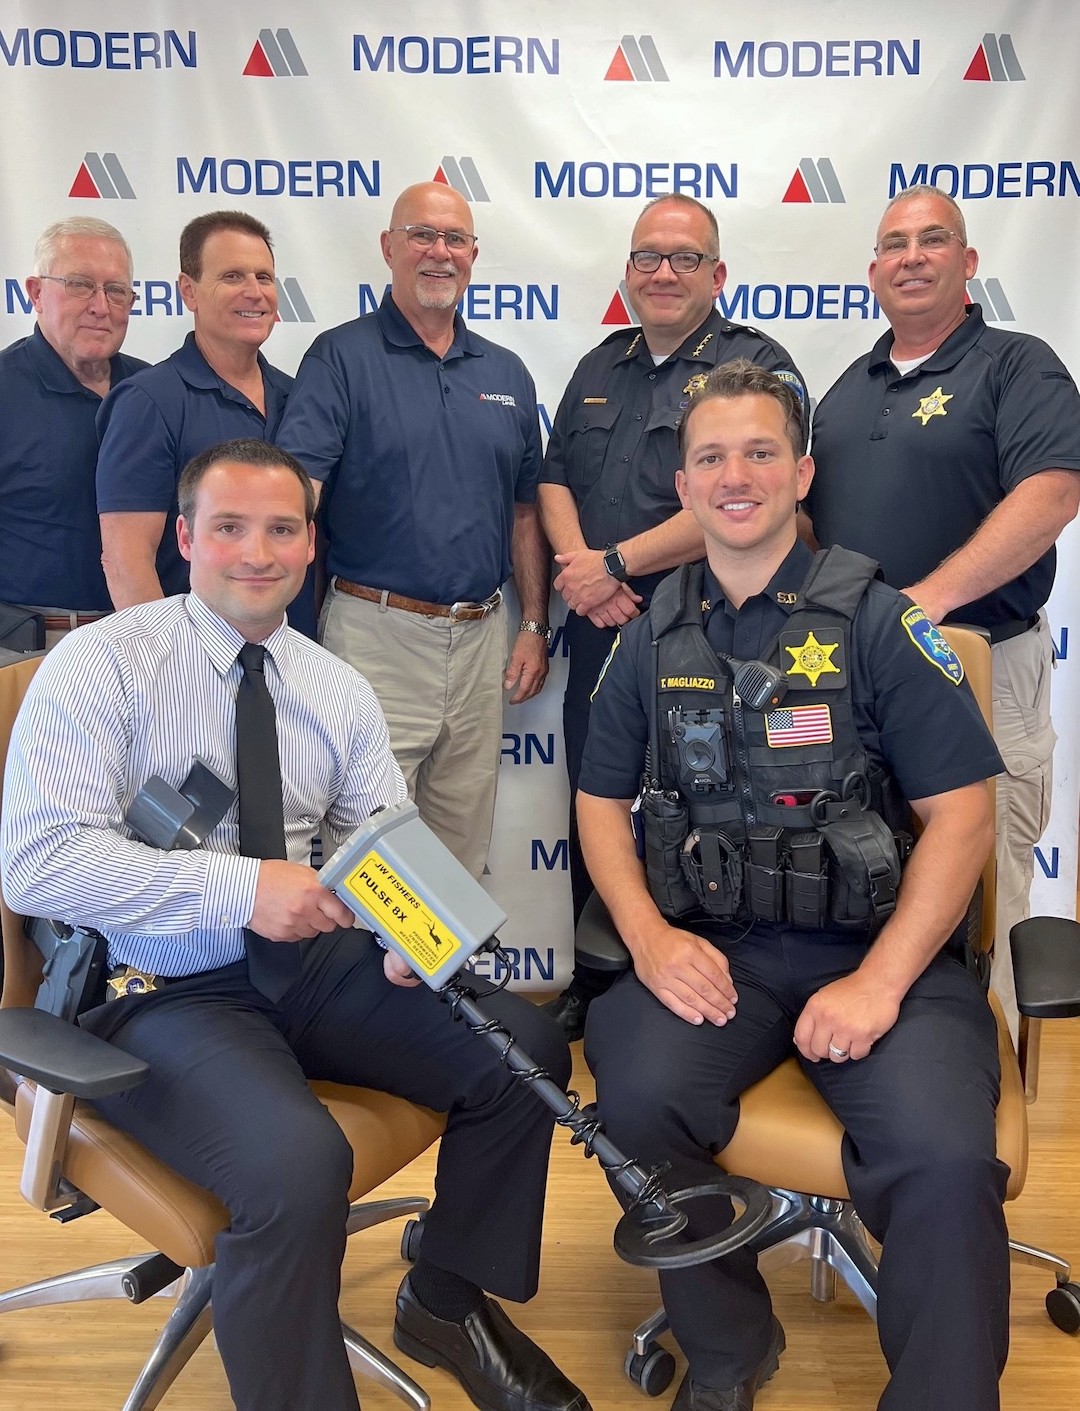 Pictured, back row: Niagara County District 3 Coroner James Carroll, Mike McInerney and Robert Trunzo with Modern Disposal gather with Sherriff Michael Filicetti and Lt. James Lucas. Front row: Investigator Keith Hetrick and Deputy Tyler Magliazzo from the underwater recovery team.